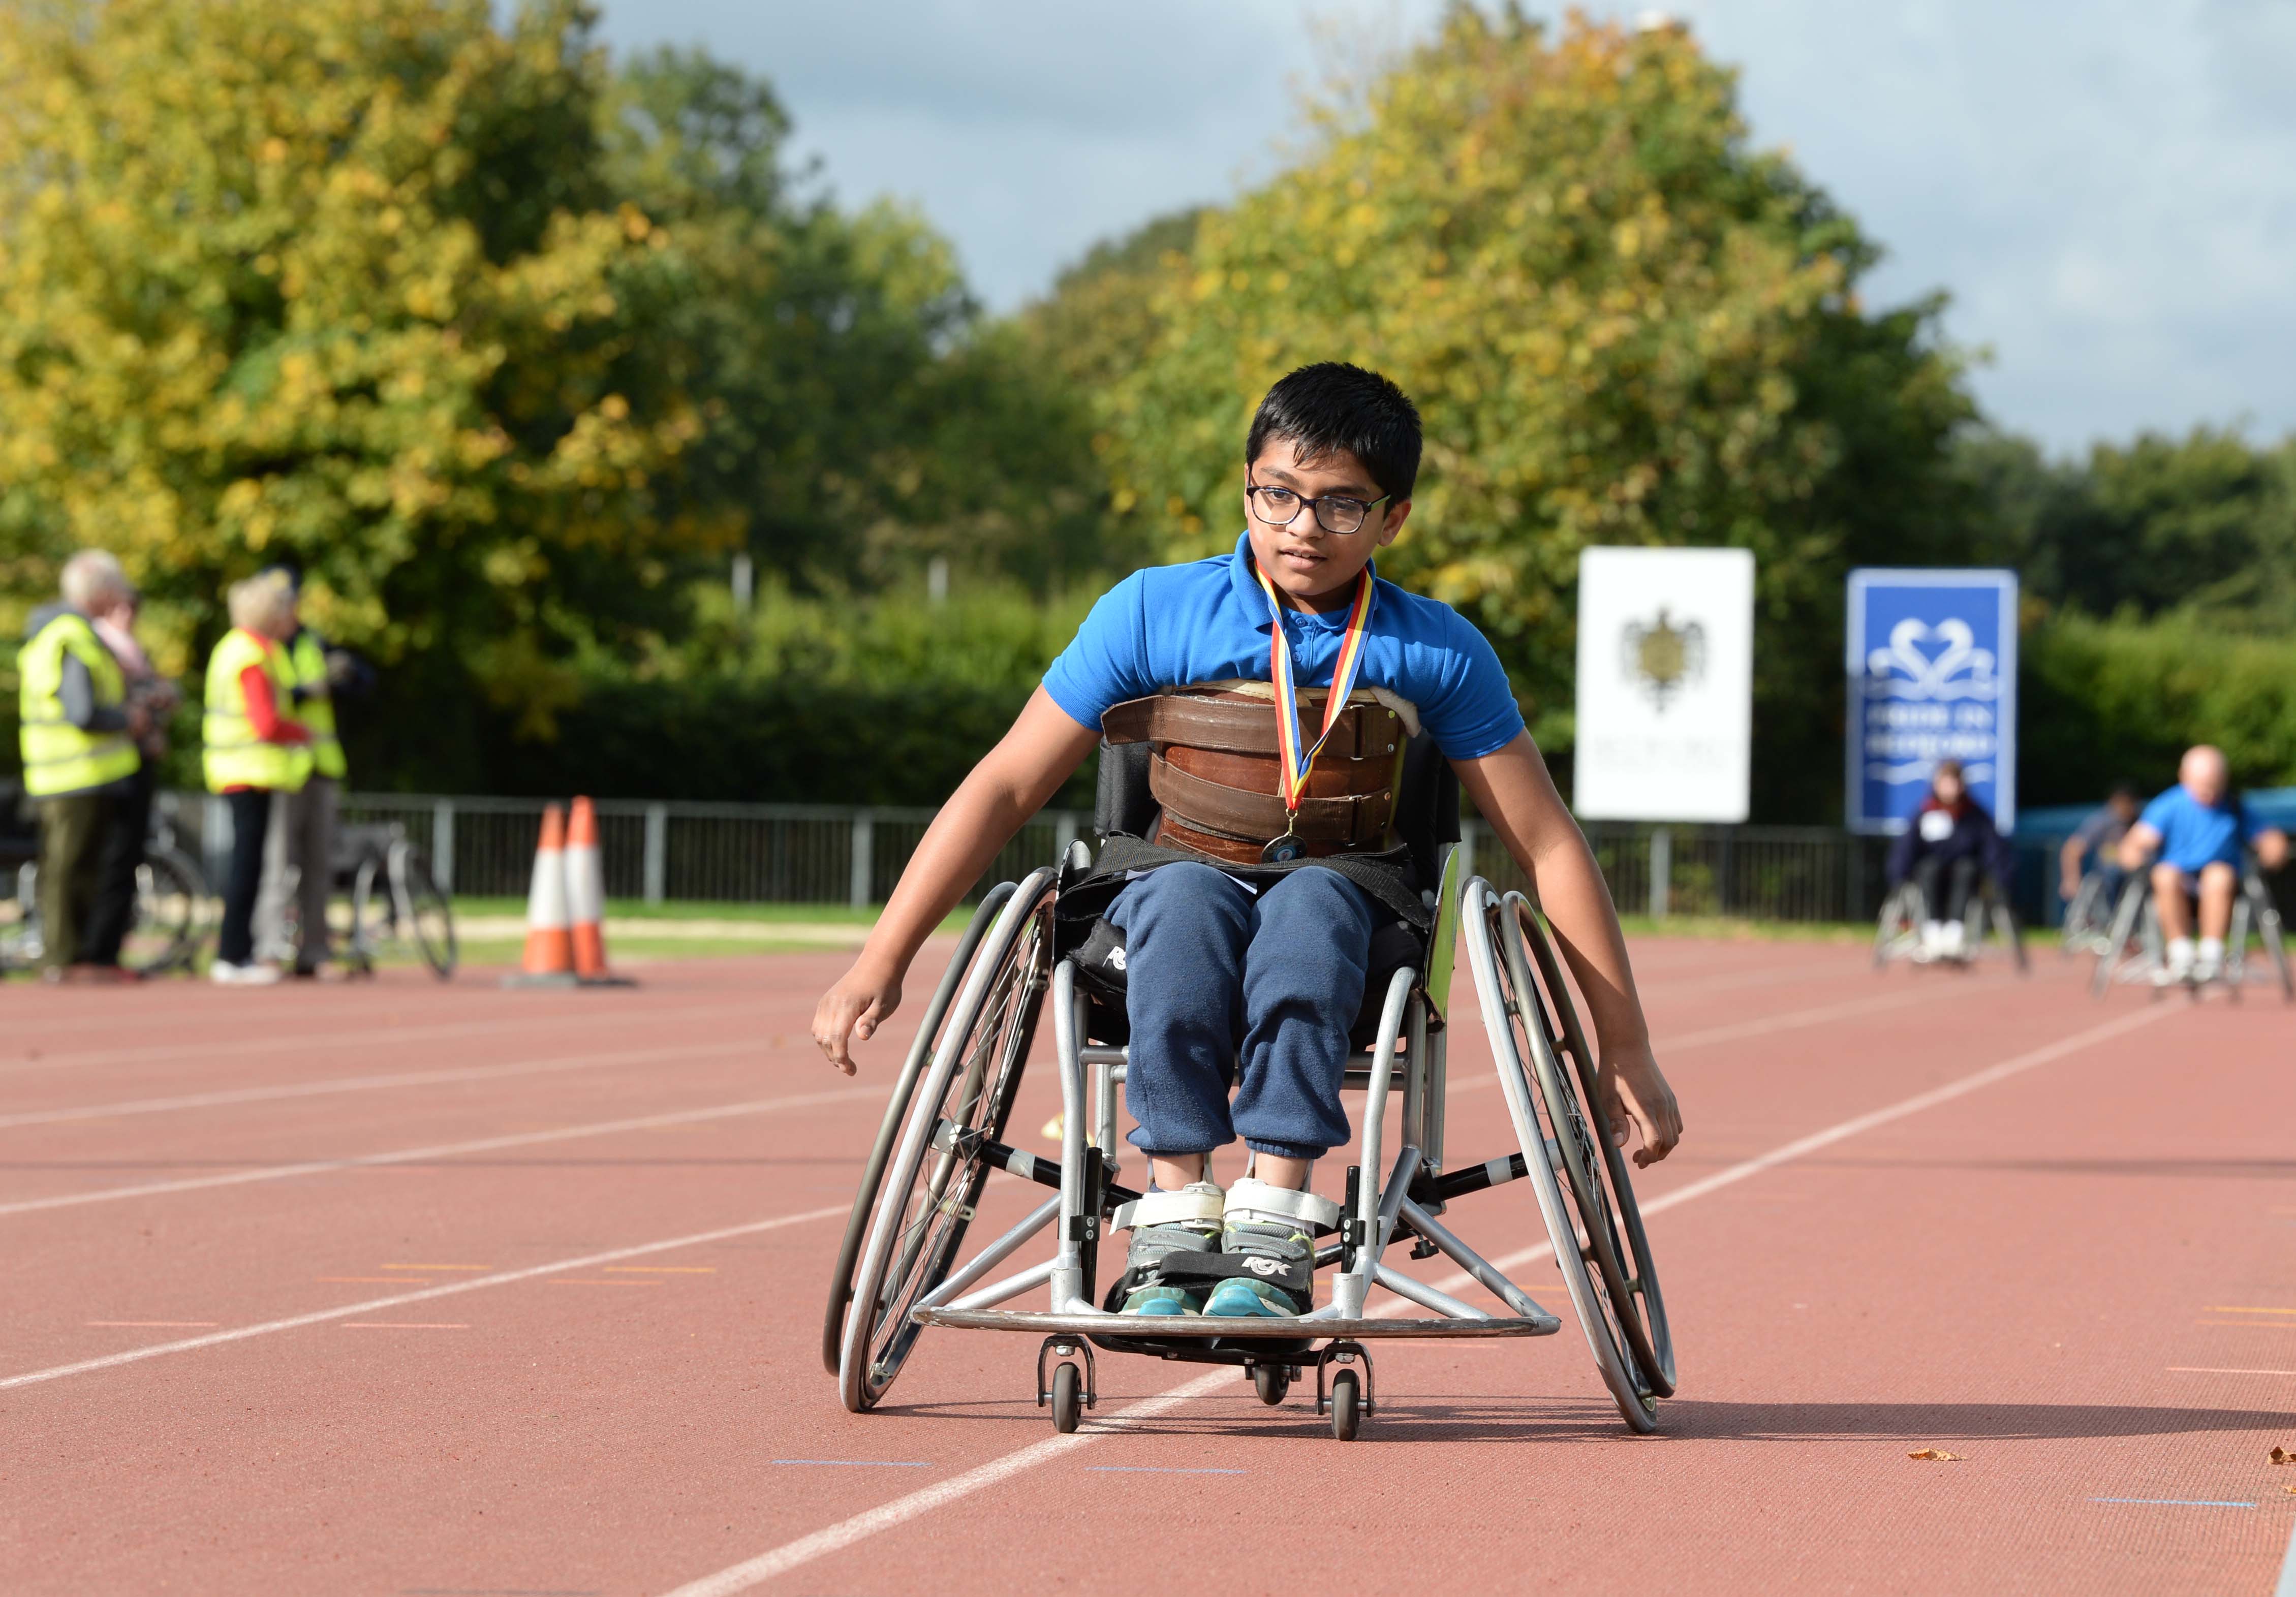 Joint Rotary Clubs Success with “Push4IT” Wheelchair Racing - Varun Bandi shows us how to do it - Perfect control!